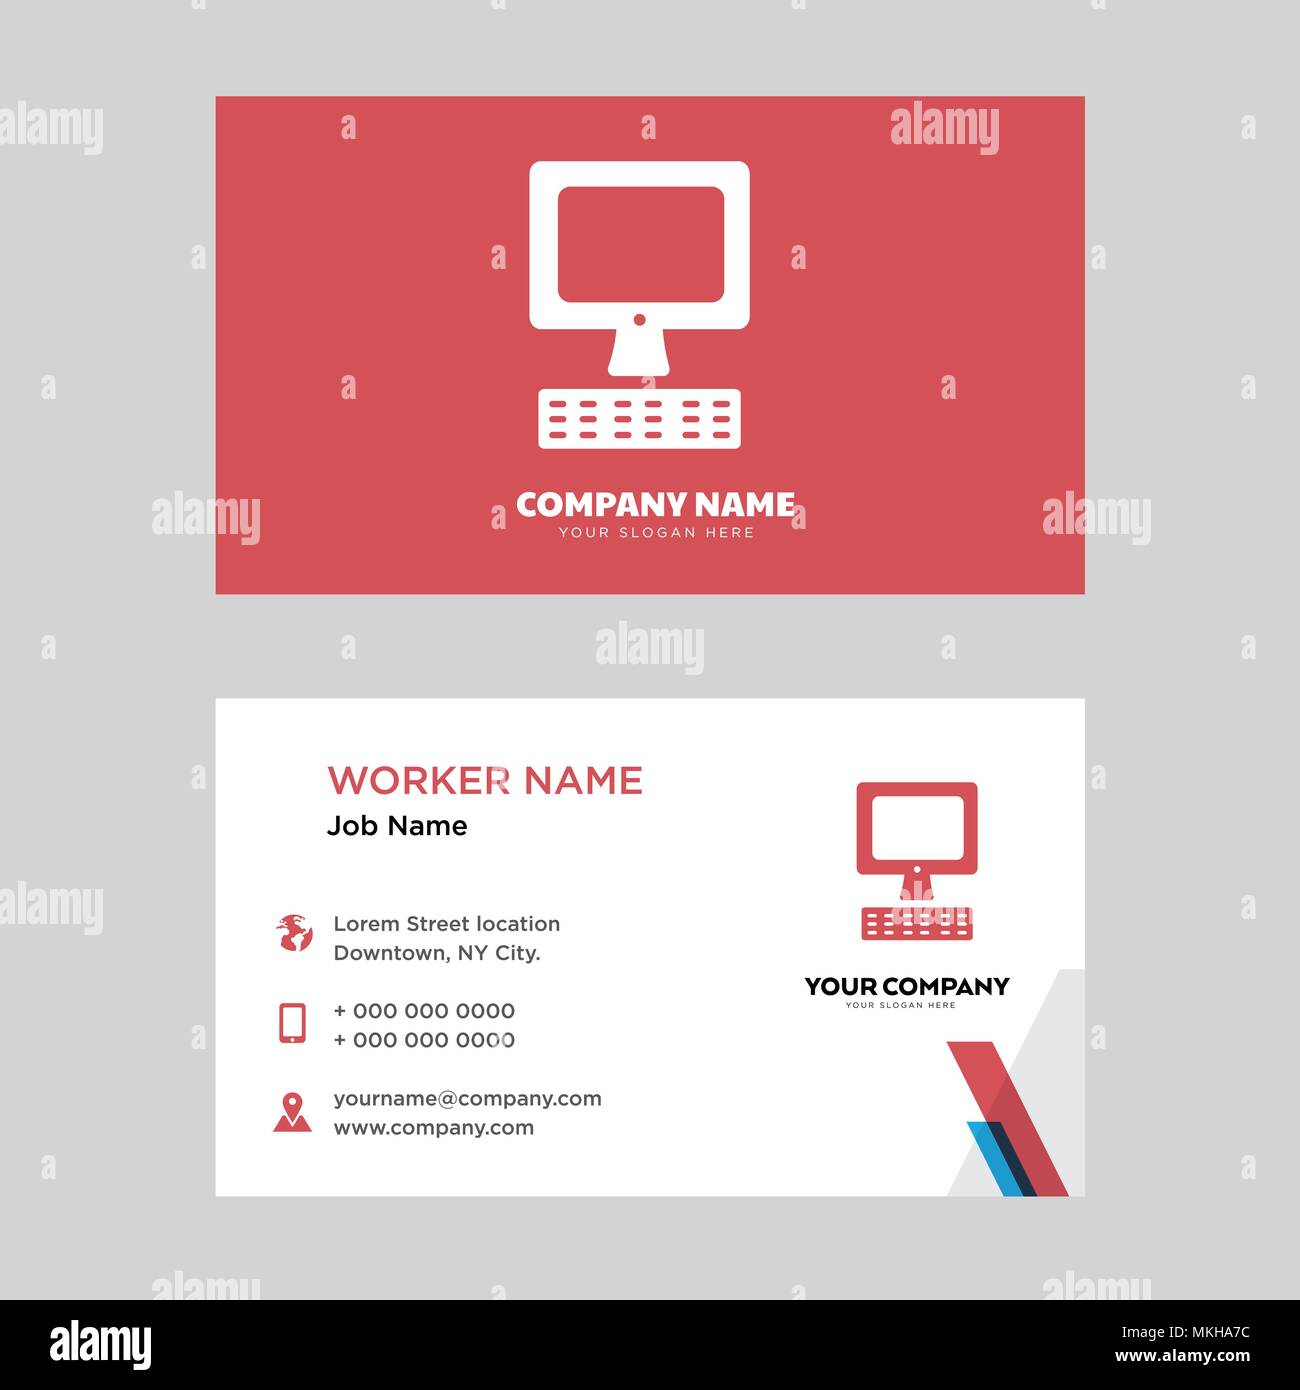 Computer Business Card Design Template Visiting For Your Company